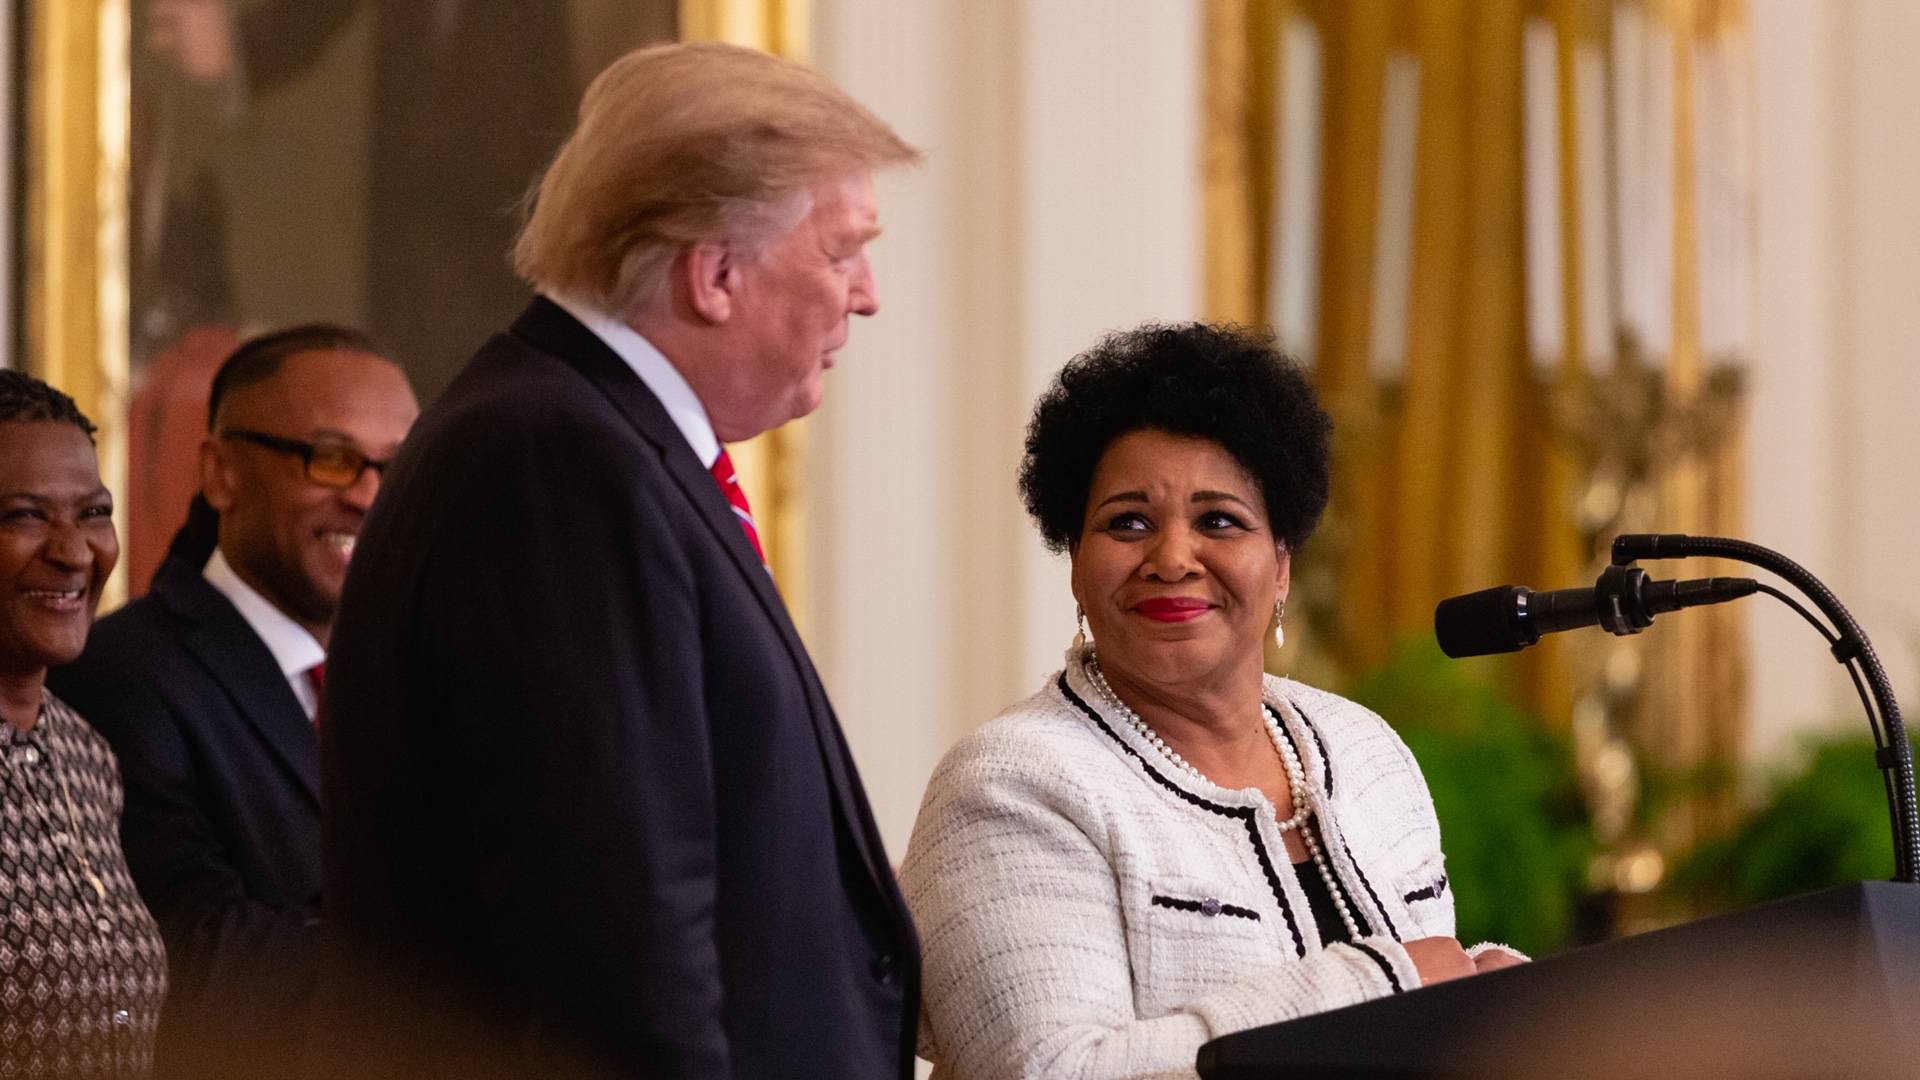 Alice Johnson and Donald Trump on BET Buzz 2020.